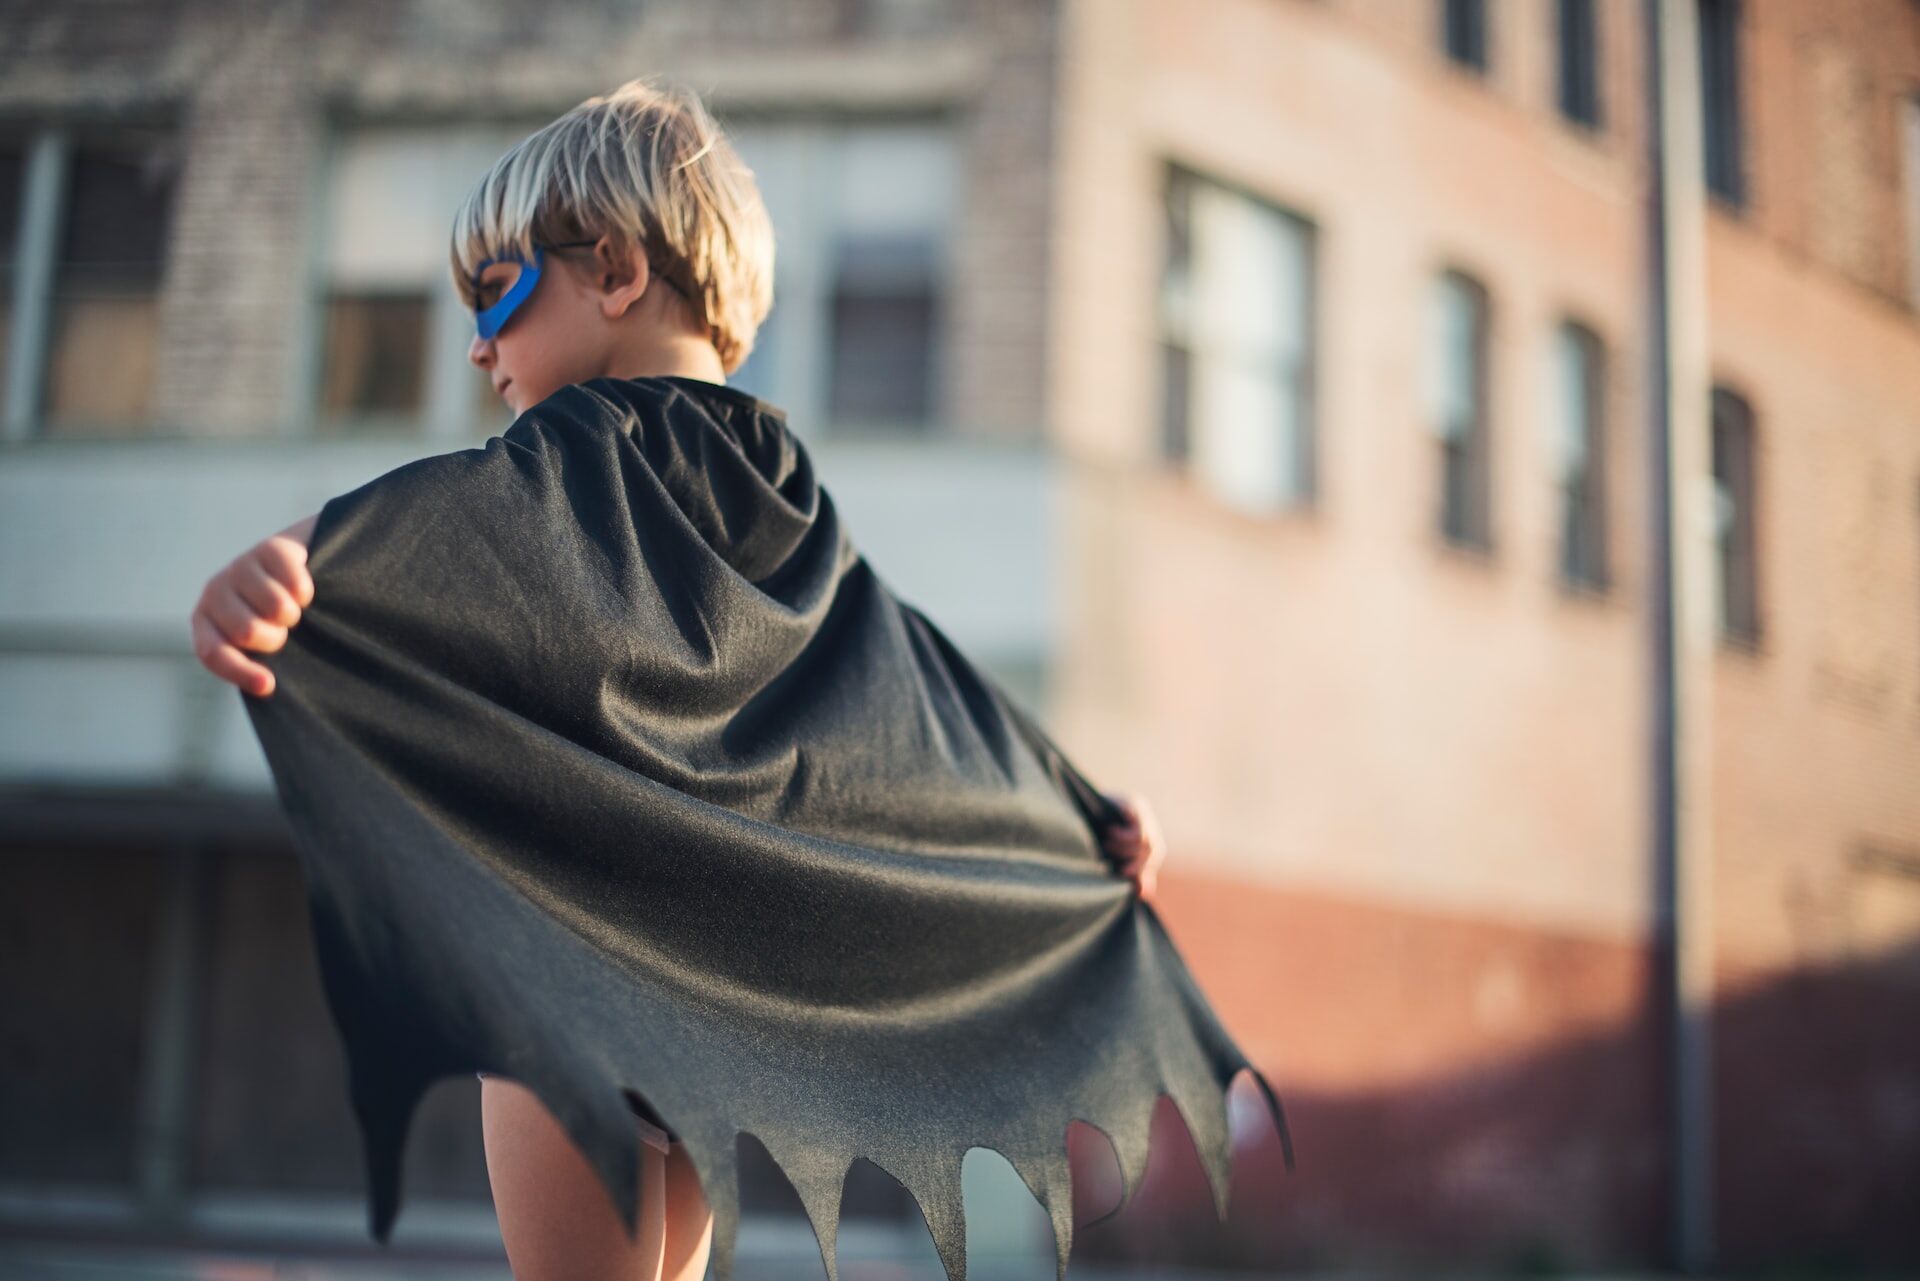 If you could have a superpower, what would it be?, Children International